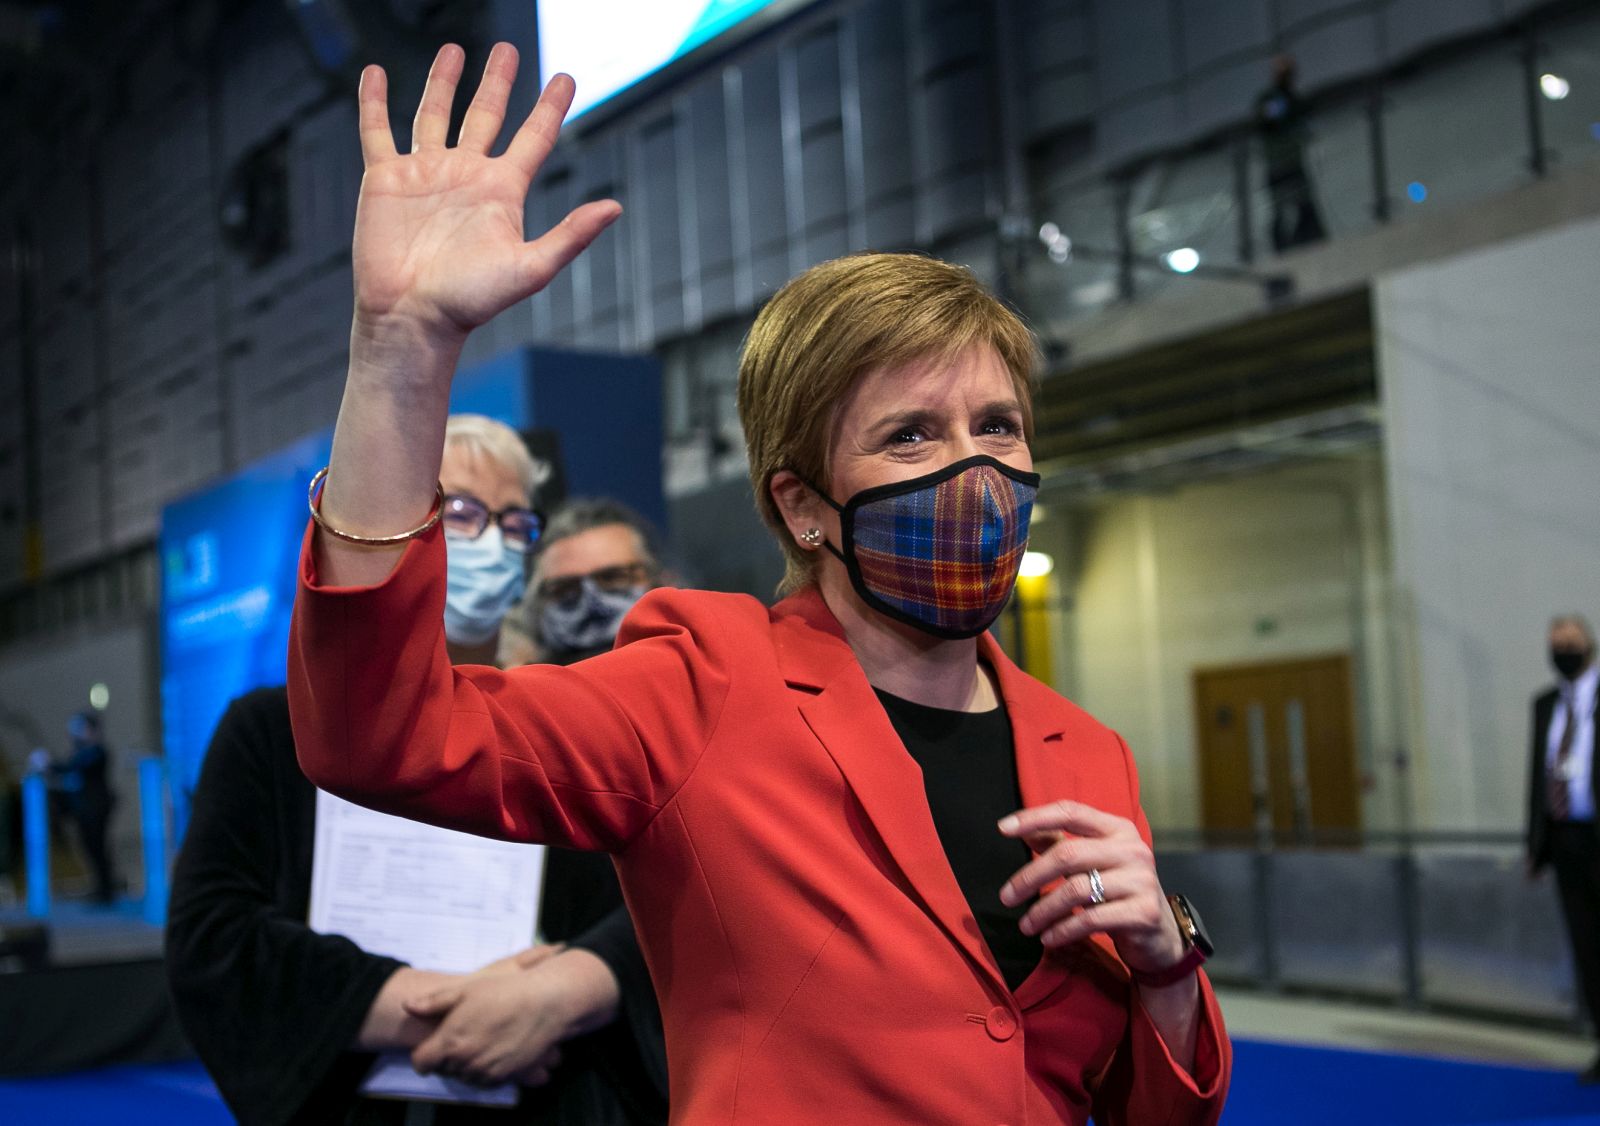 epa09183765 Scotland's First Minister and leader of the Scottish National Party (SNP), Nicola Sturgeon celebrates being declared the winner of the Glasgow Southside seat at Glasgow counting centre in the Emirates Arena in Glasgow, Britain 07 May 2021. People in Scotland headed to the polls on 06 May to elect 129 members of the Scottish Parliament. The vote count began on 07 May and the final results are expected to be announced on 08 May.  EPA/ROBERT PERRY